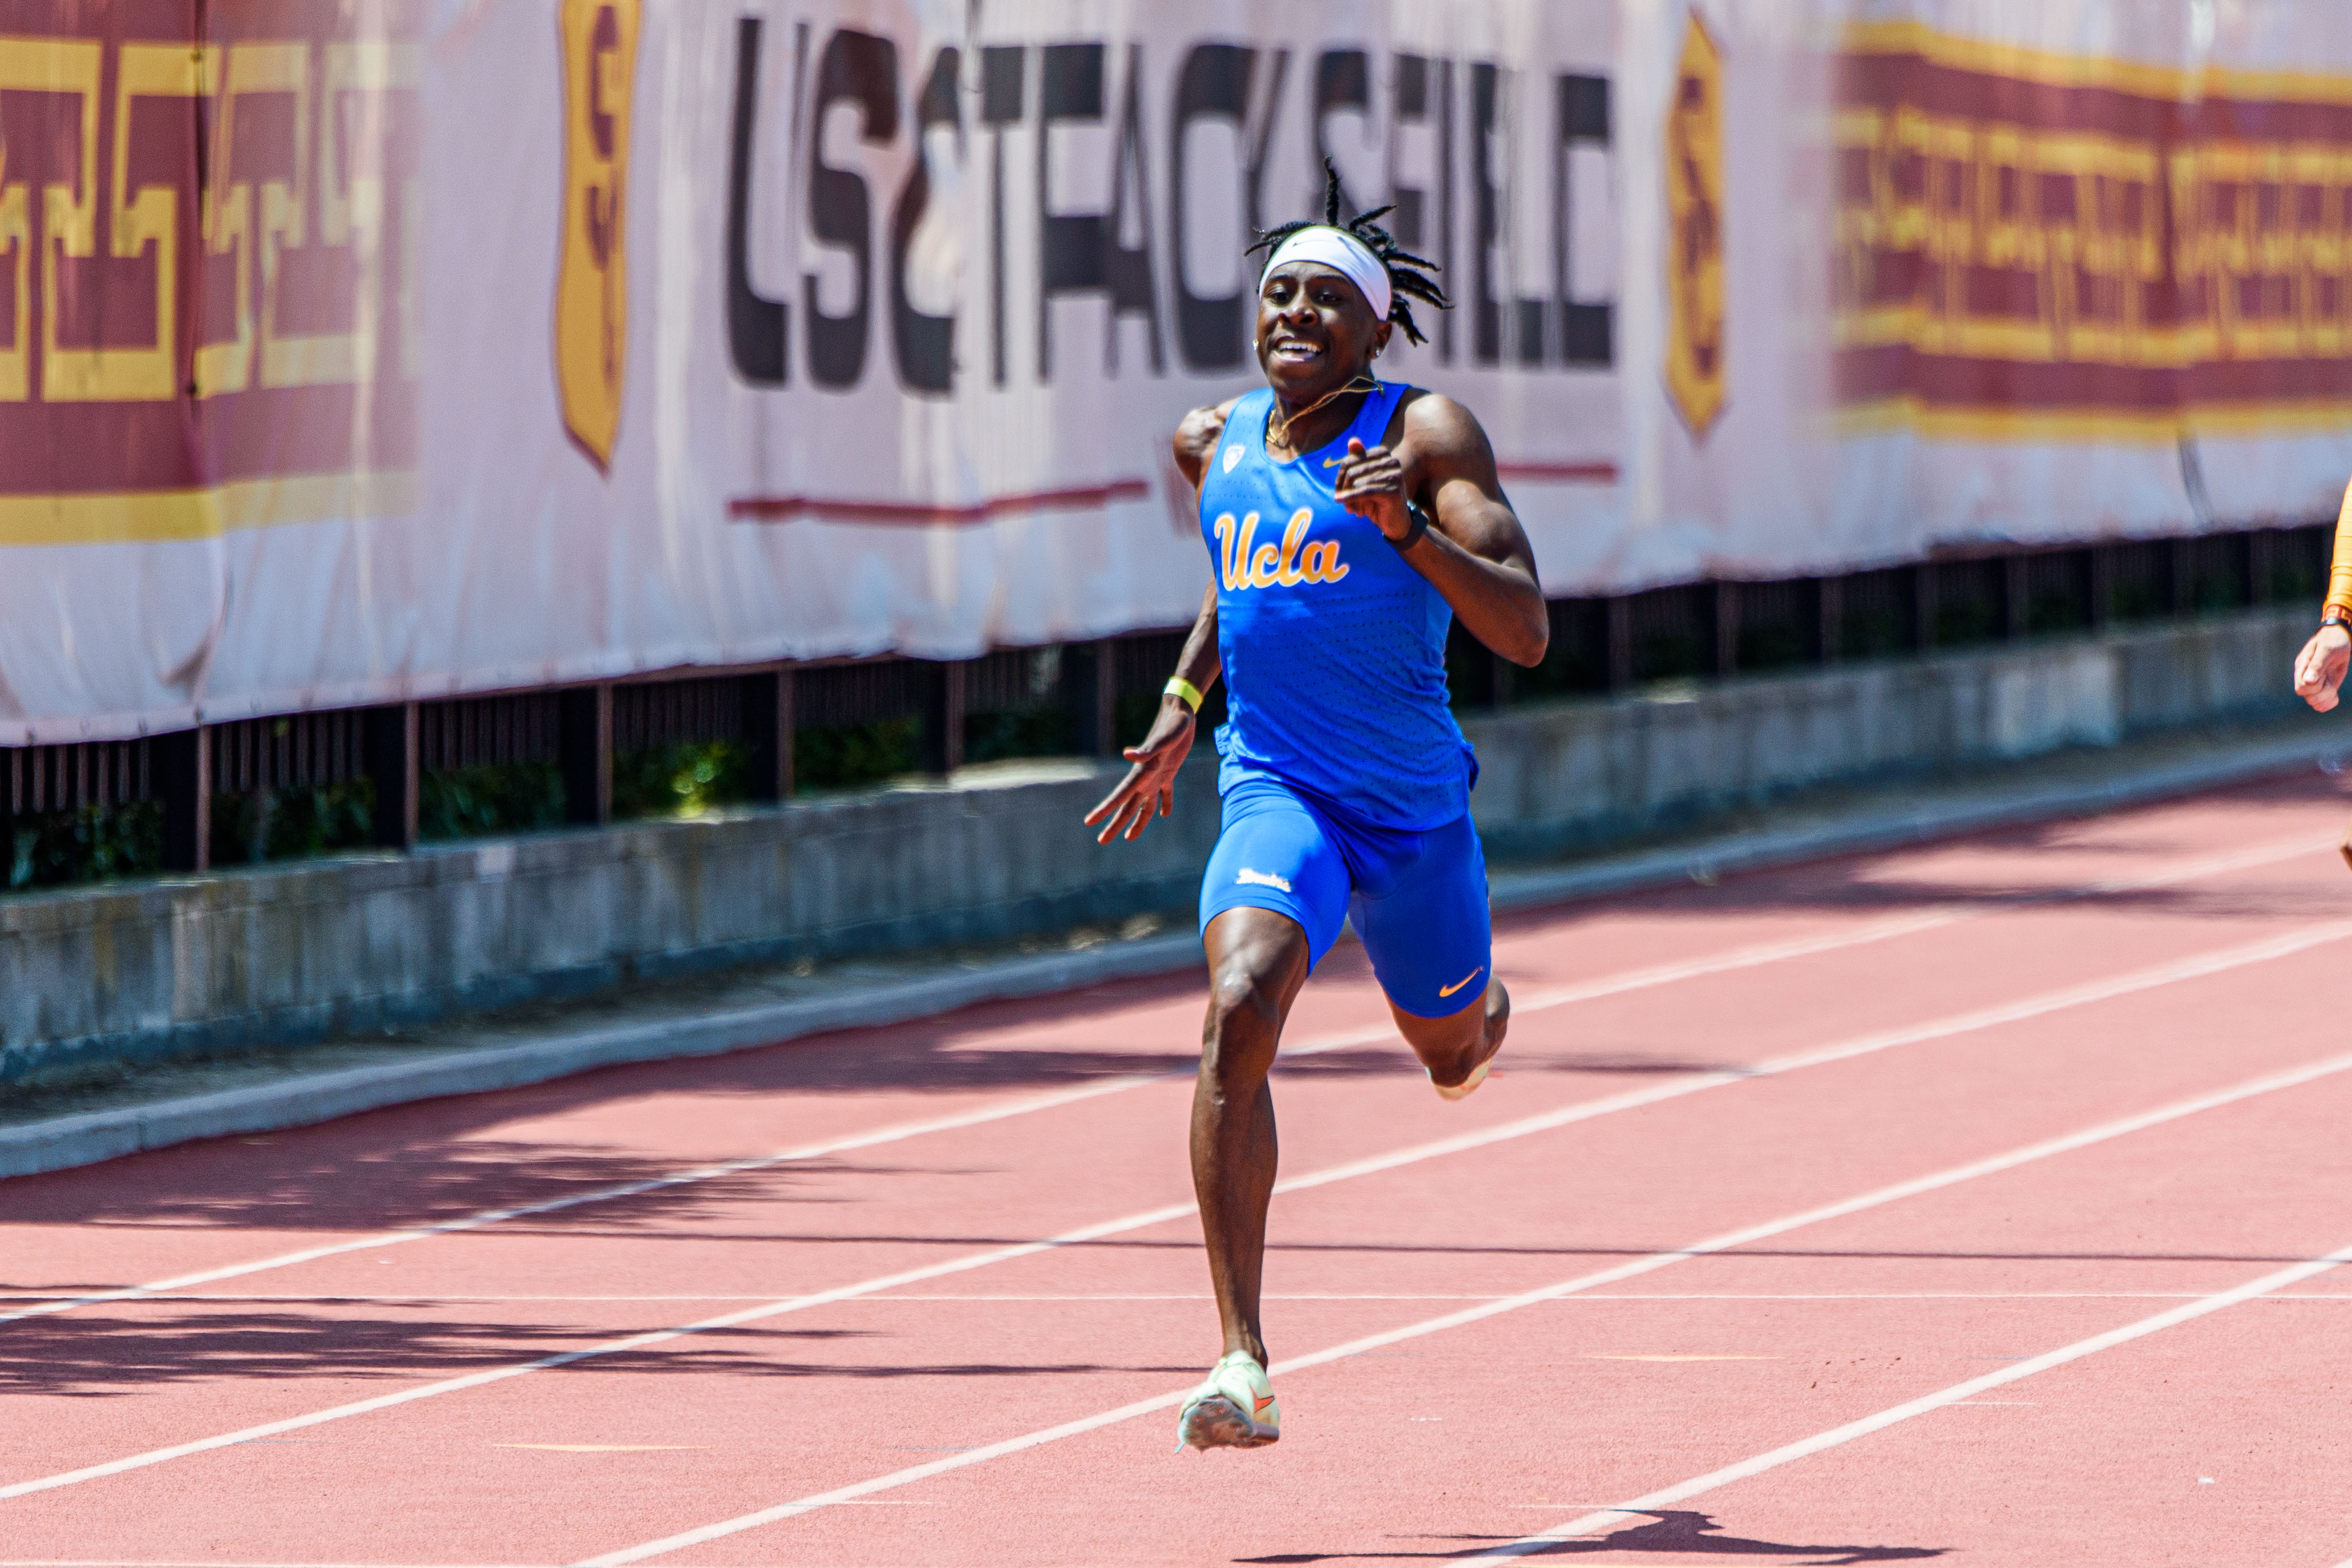 UCLA track and field kicks off outdoor season by breaking records at